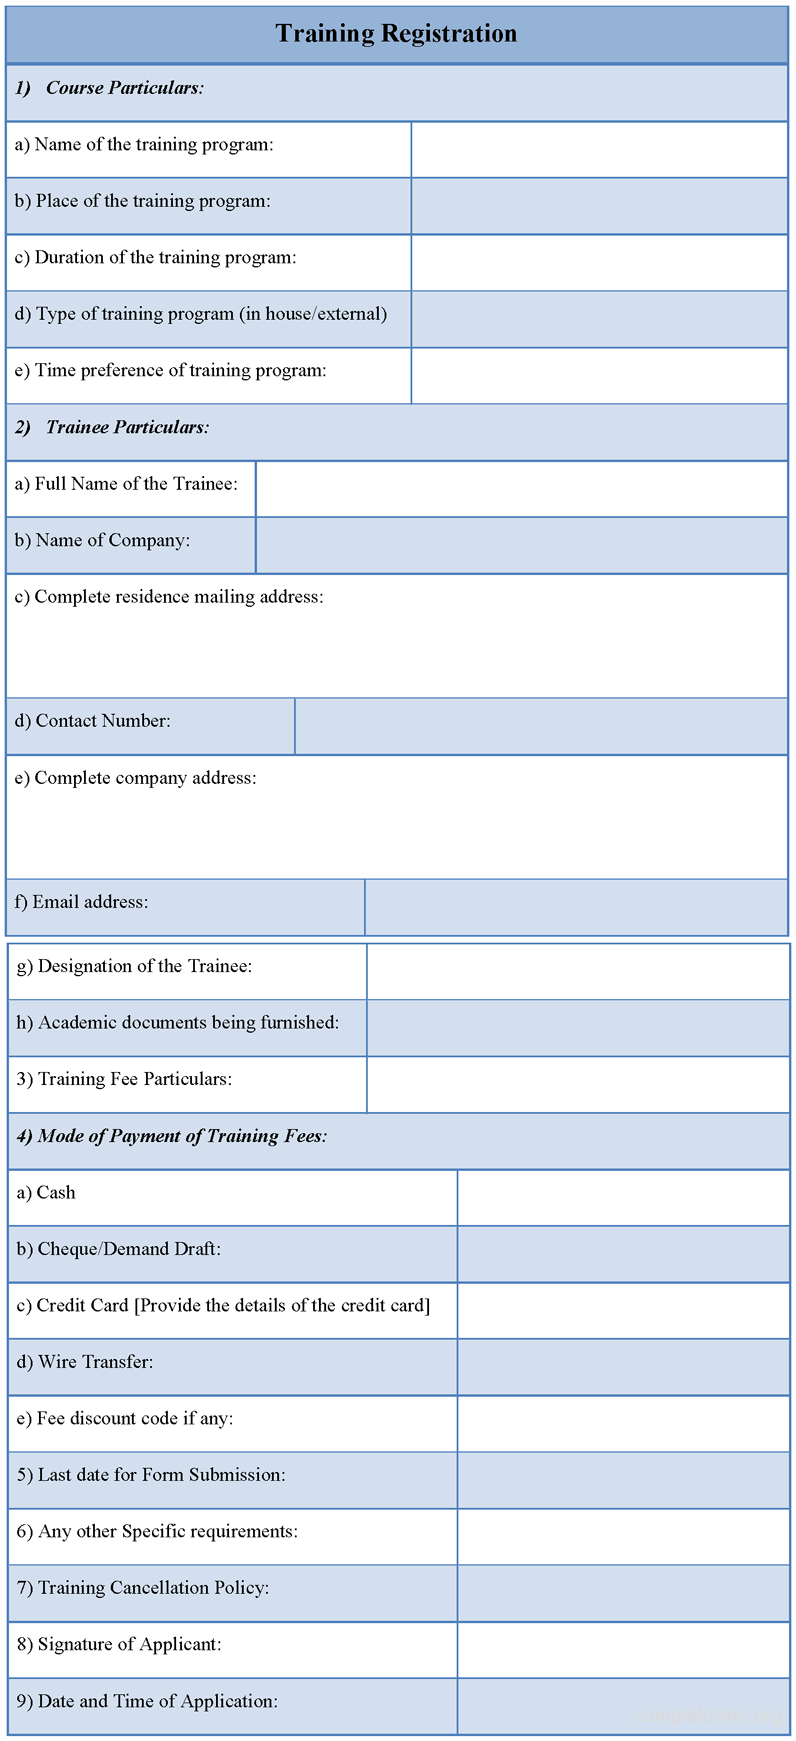 Training Feedback Form Template Xls | Education Resume Section Pertaining To 8D Report Template Xls